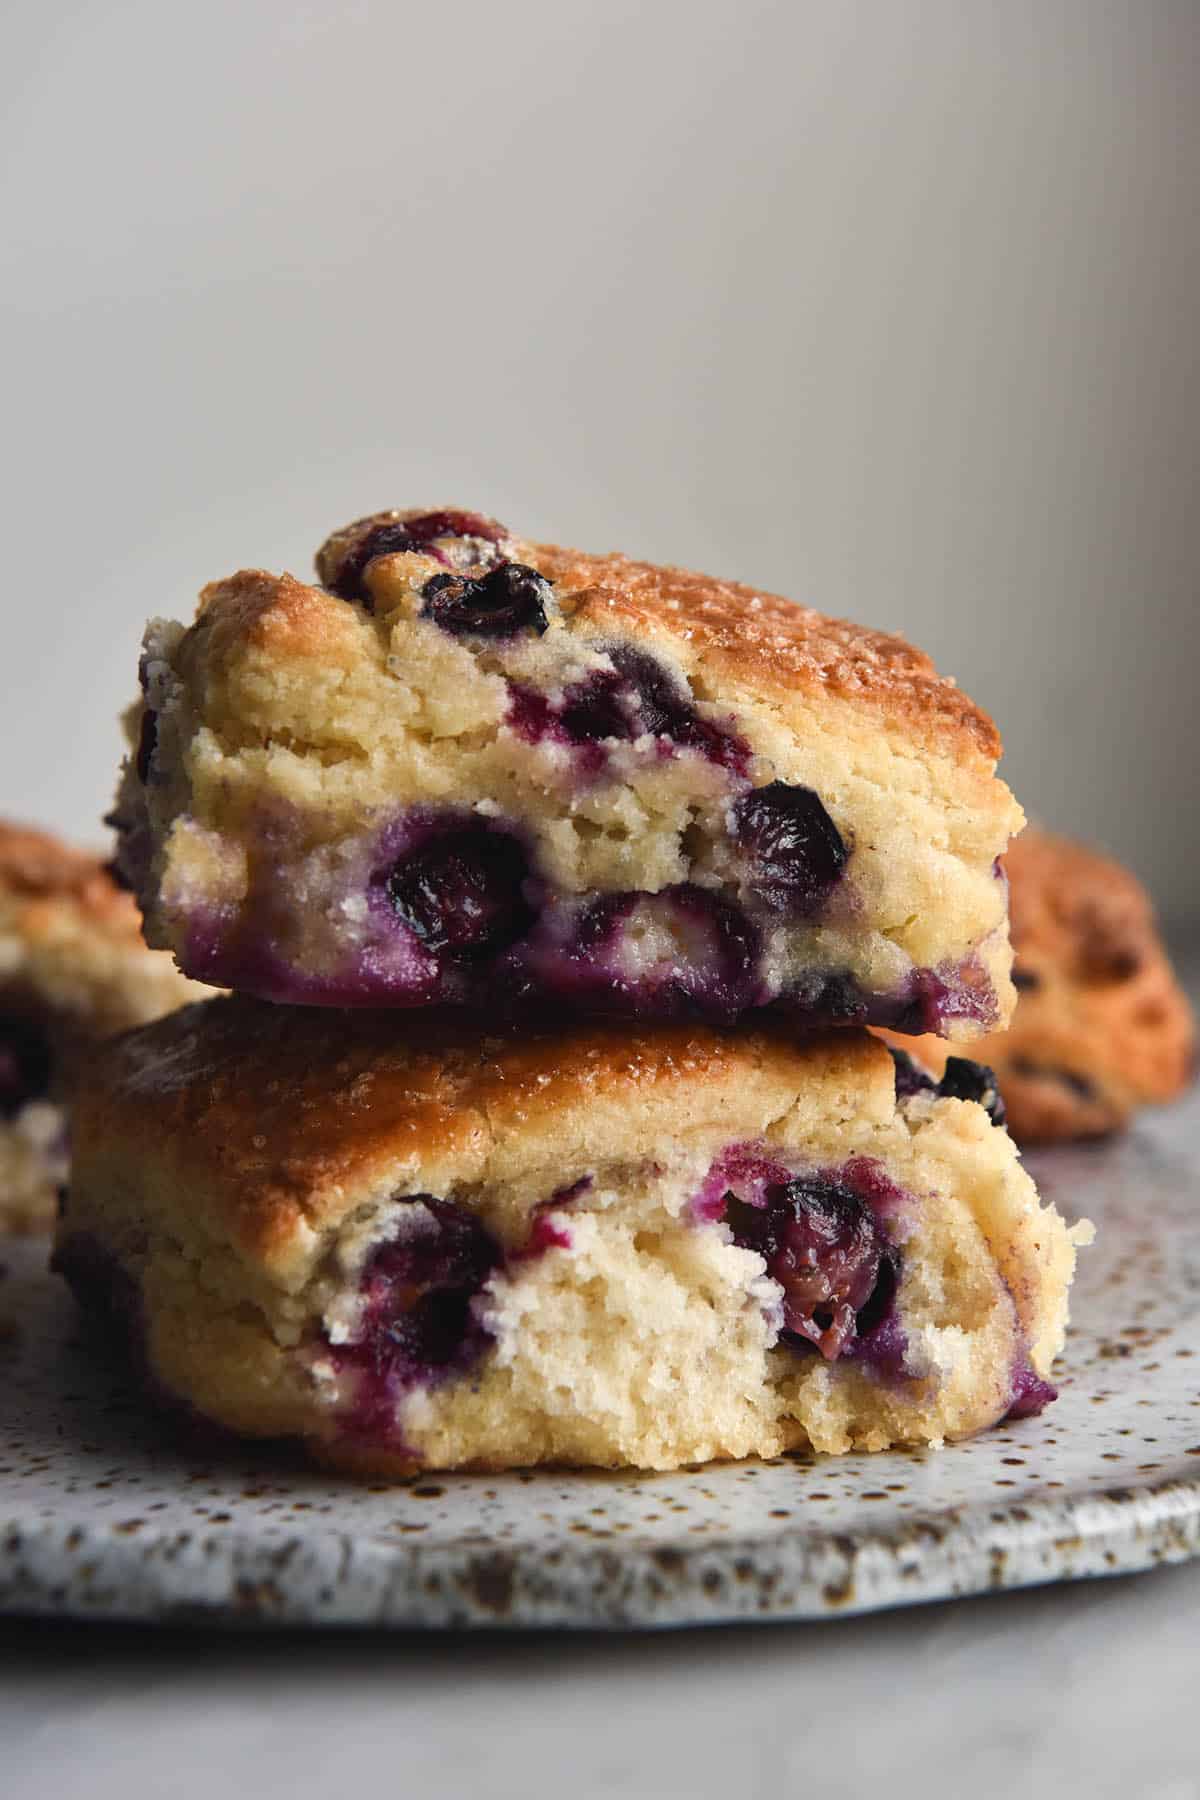 An side on view of a stack of two gluten free blueberry scones. They sit atop a white speckled ceramic plate against a white wall. The scones are fluffy and dotted with oozy blueberries. Scones sit to both the left and right of the stack in the background